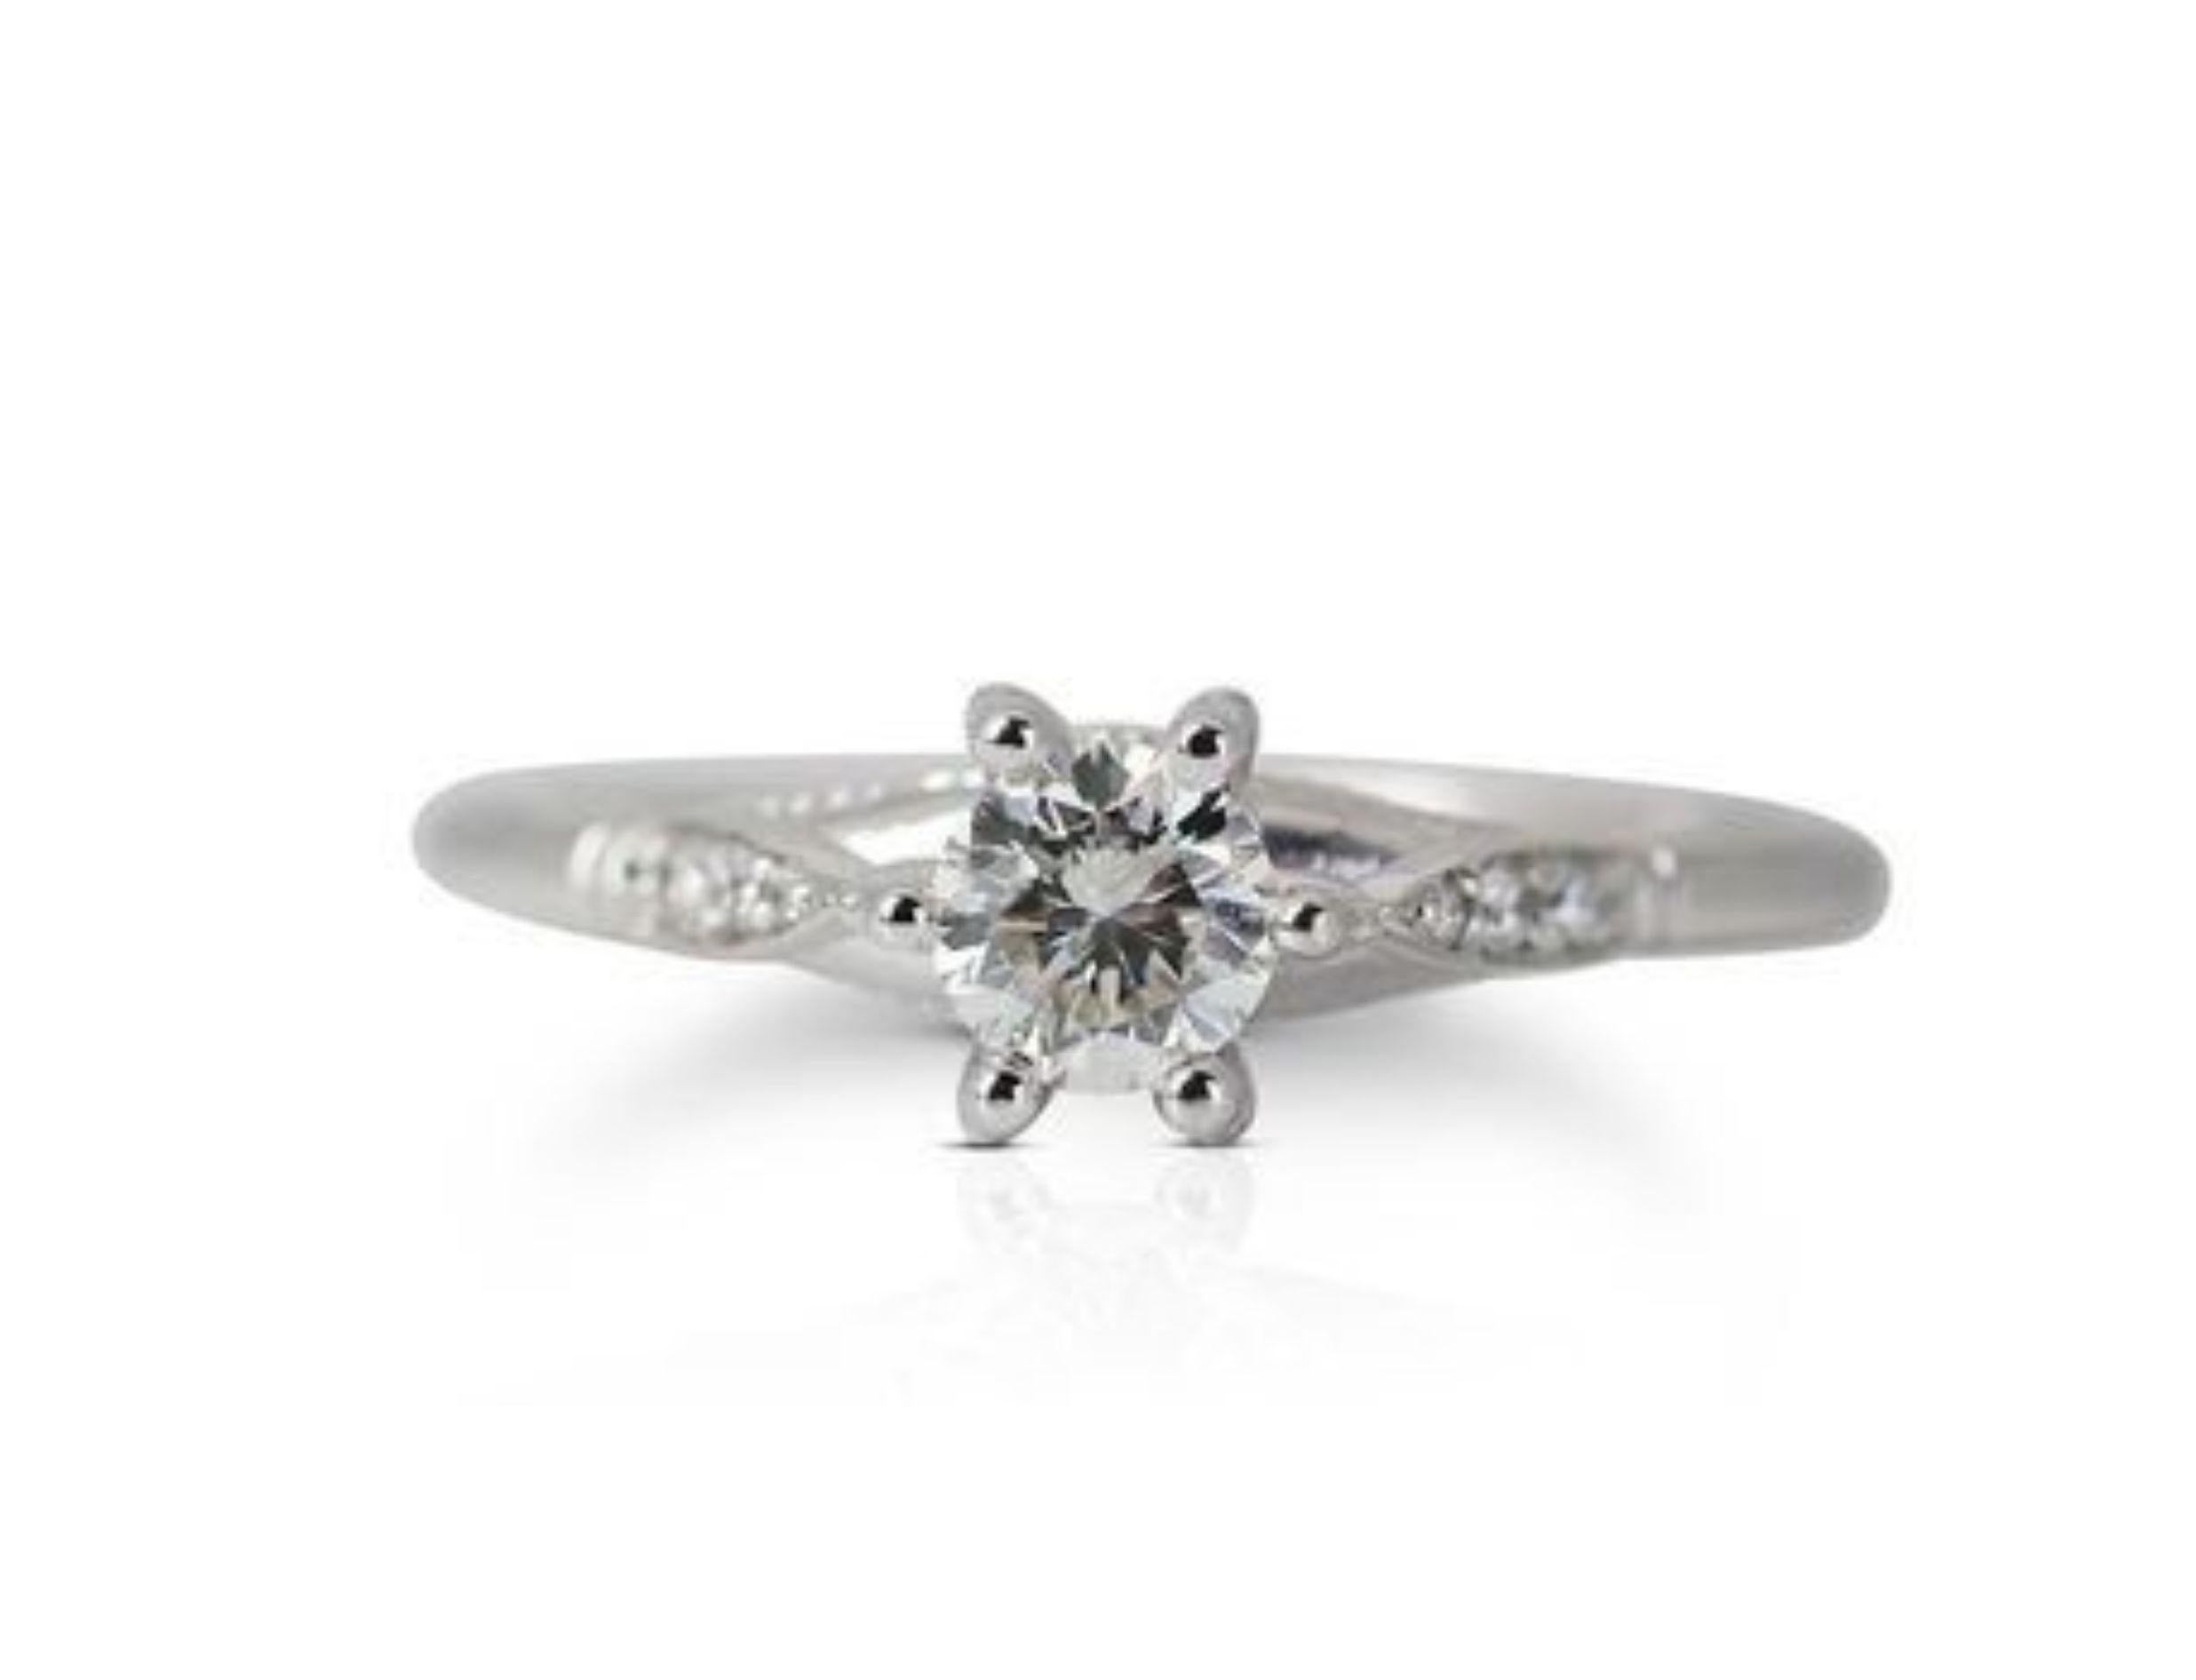 Gorgeous Solitaire Ring in 14k White Gold

At the heart of this ring is a dazzling solitaire diamond, meticulously chosen for its exceptional quality and brilliance. The solitaire setting highlights the innate beauty of the diamond, allowing it to